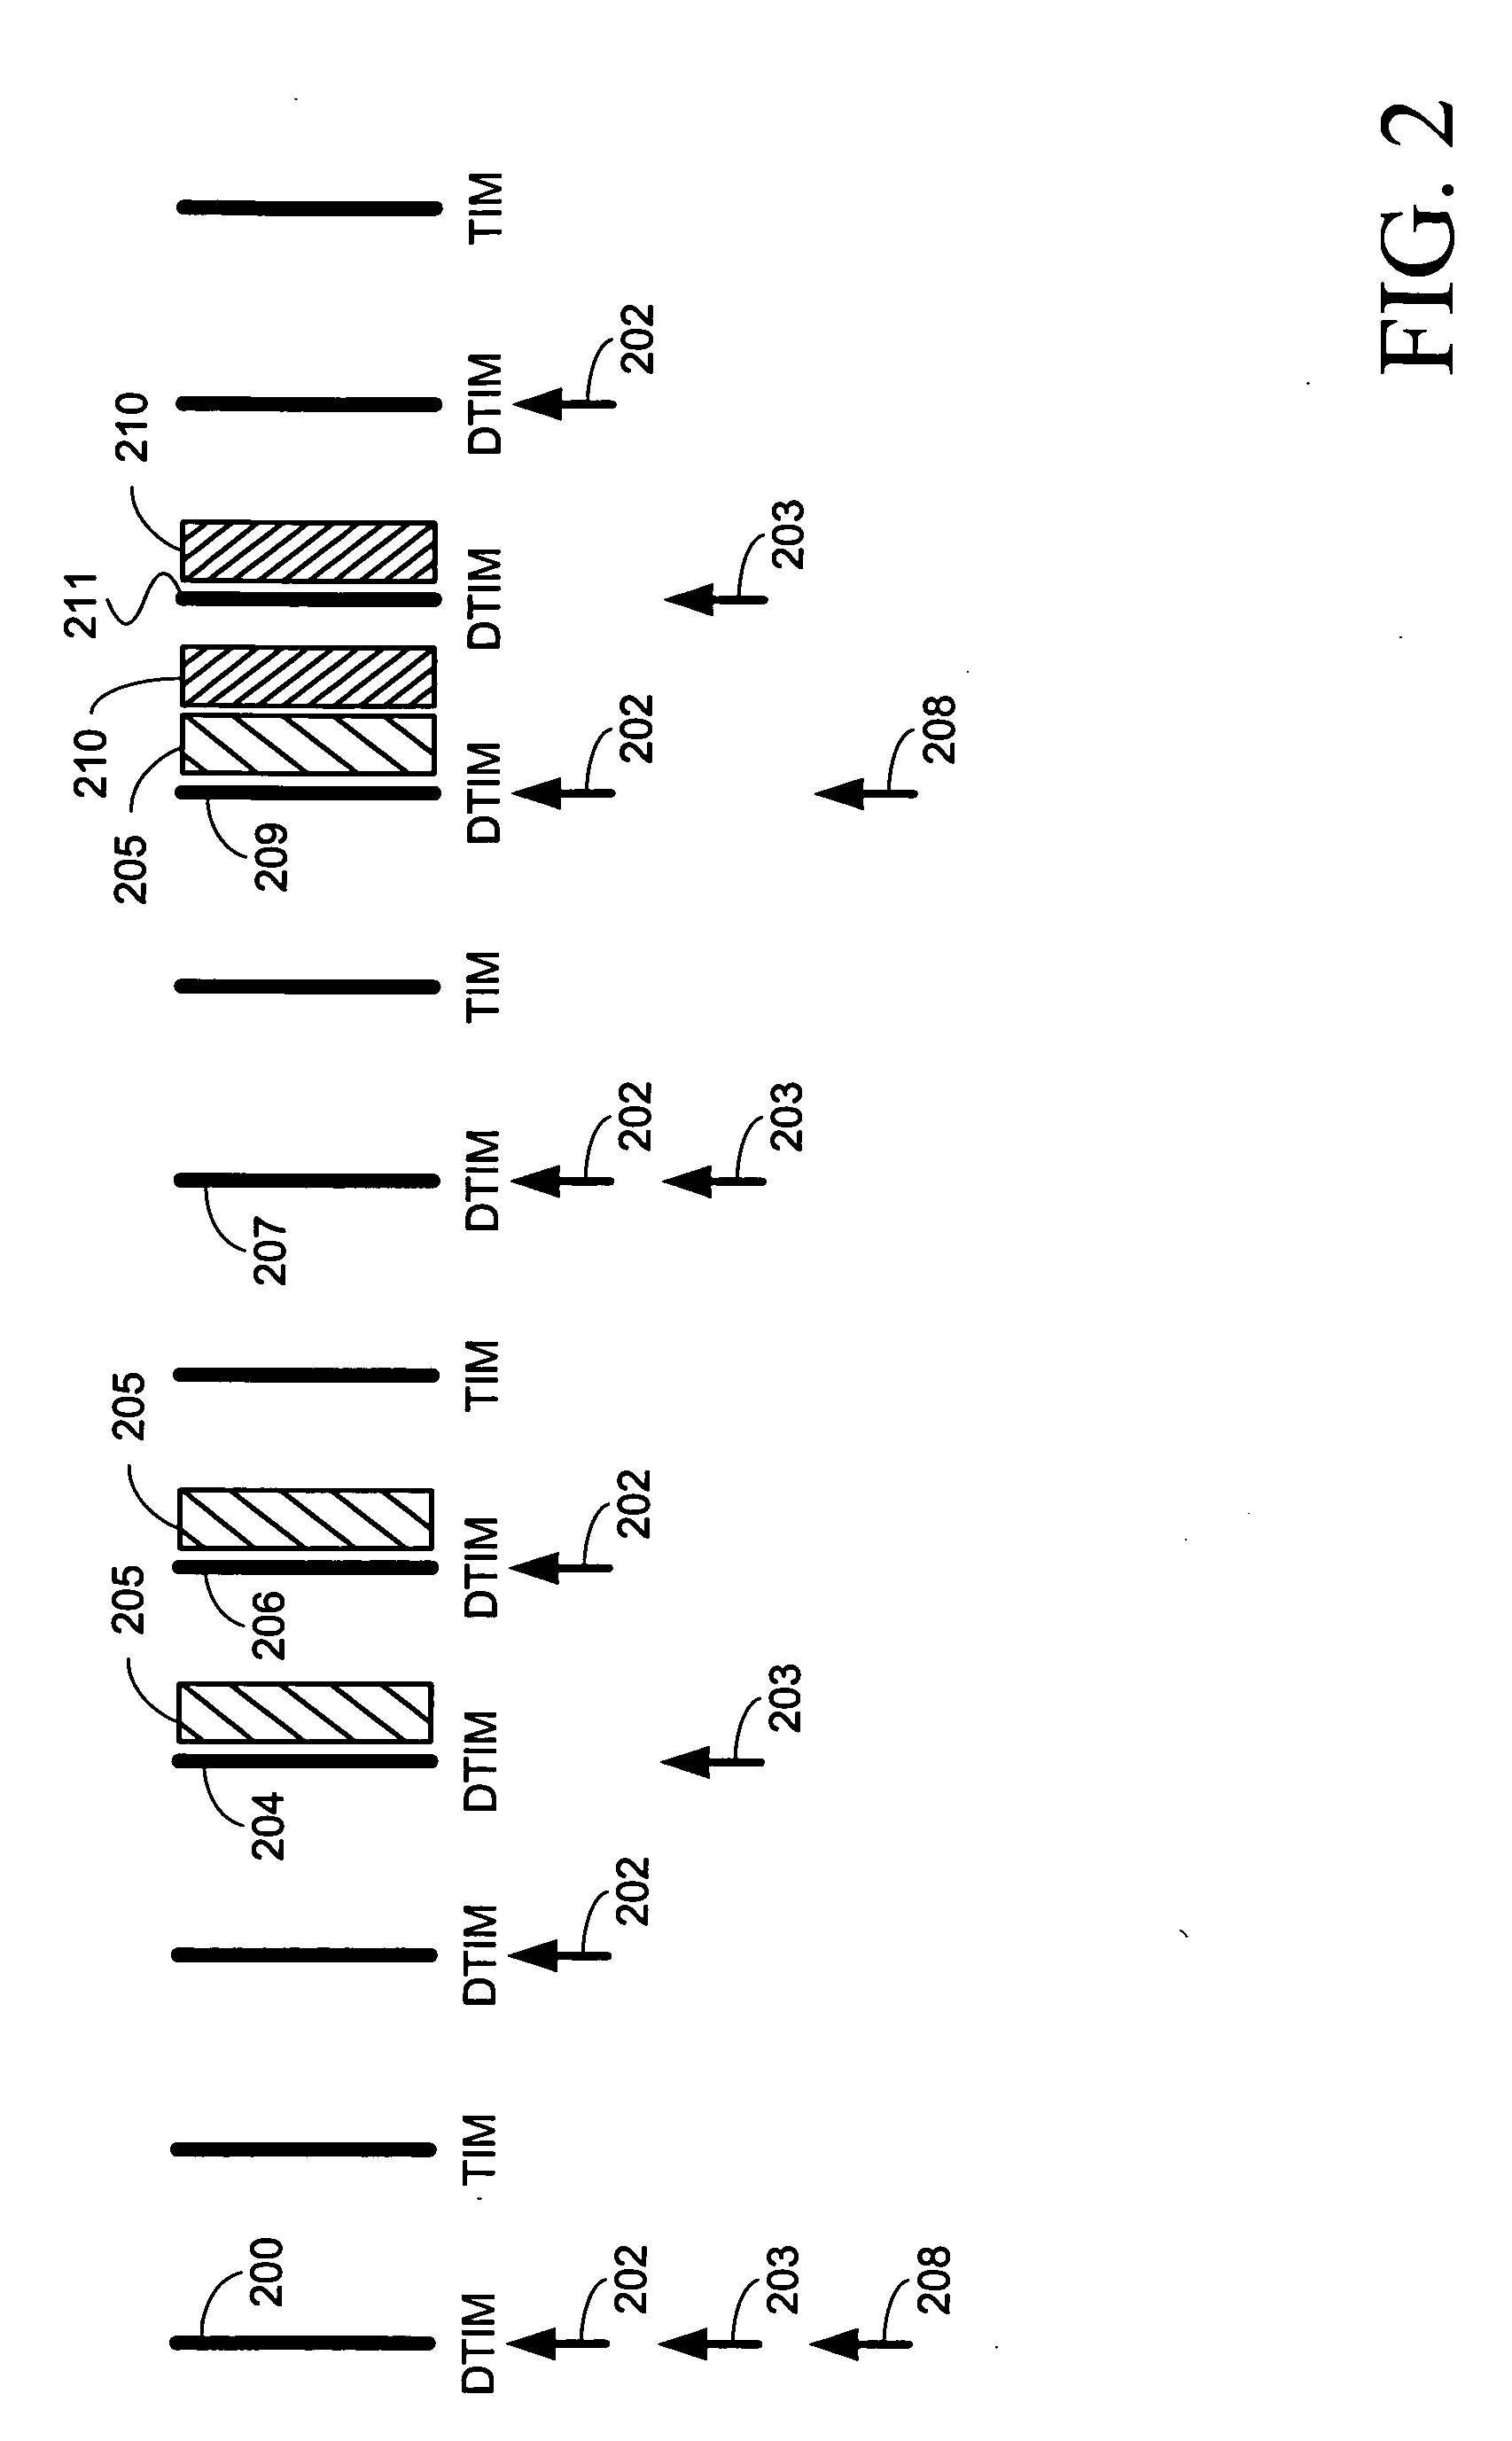 Apparatus and methods for delivery traffic indication message (DTIM) periods in a wireless network